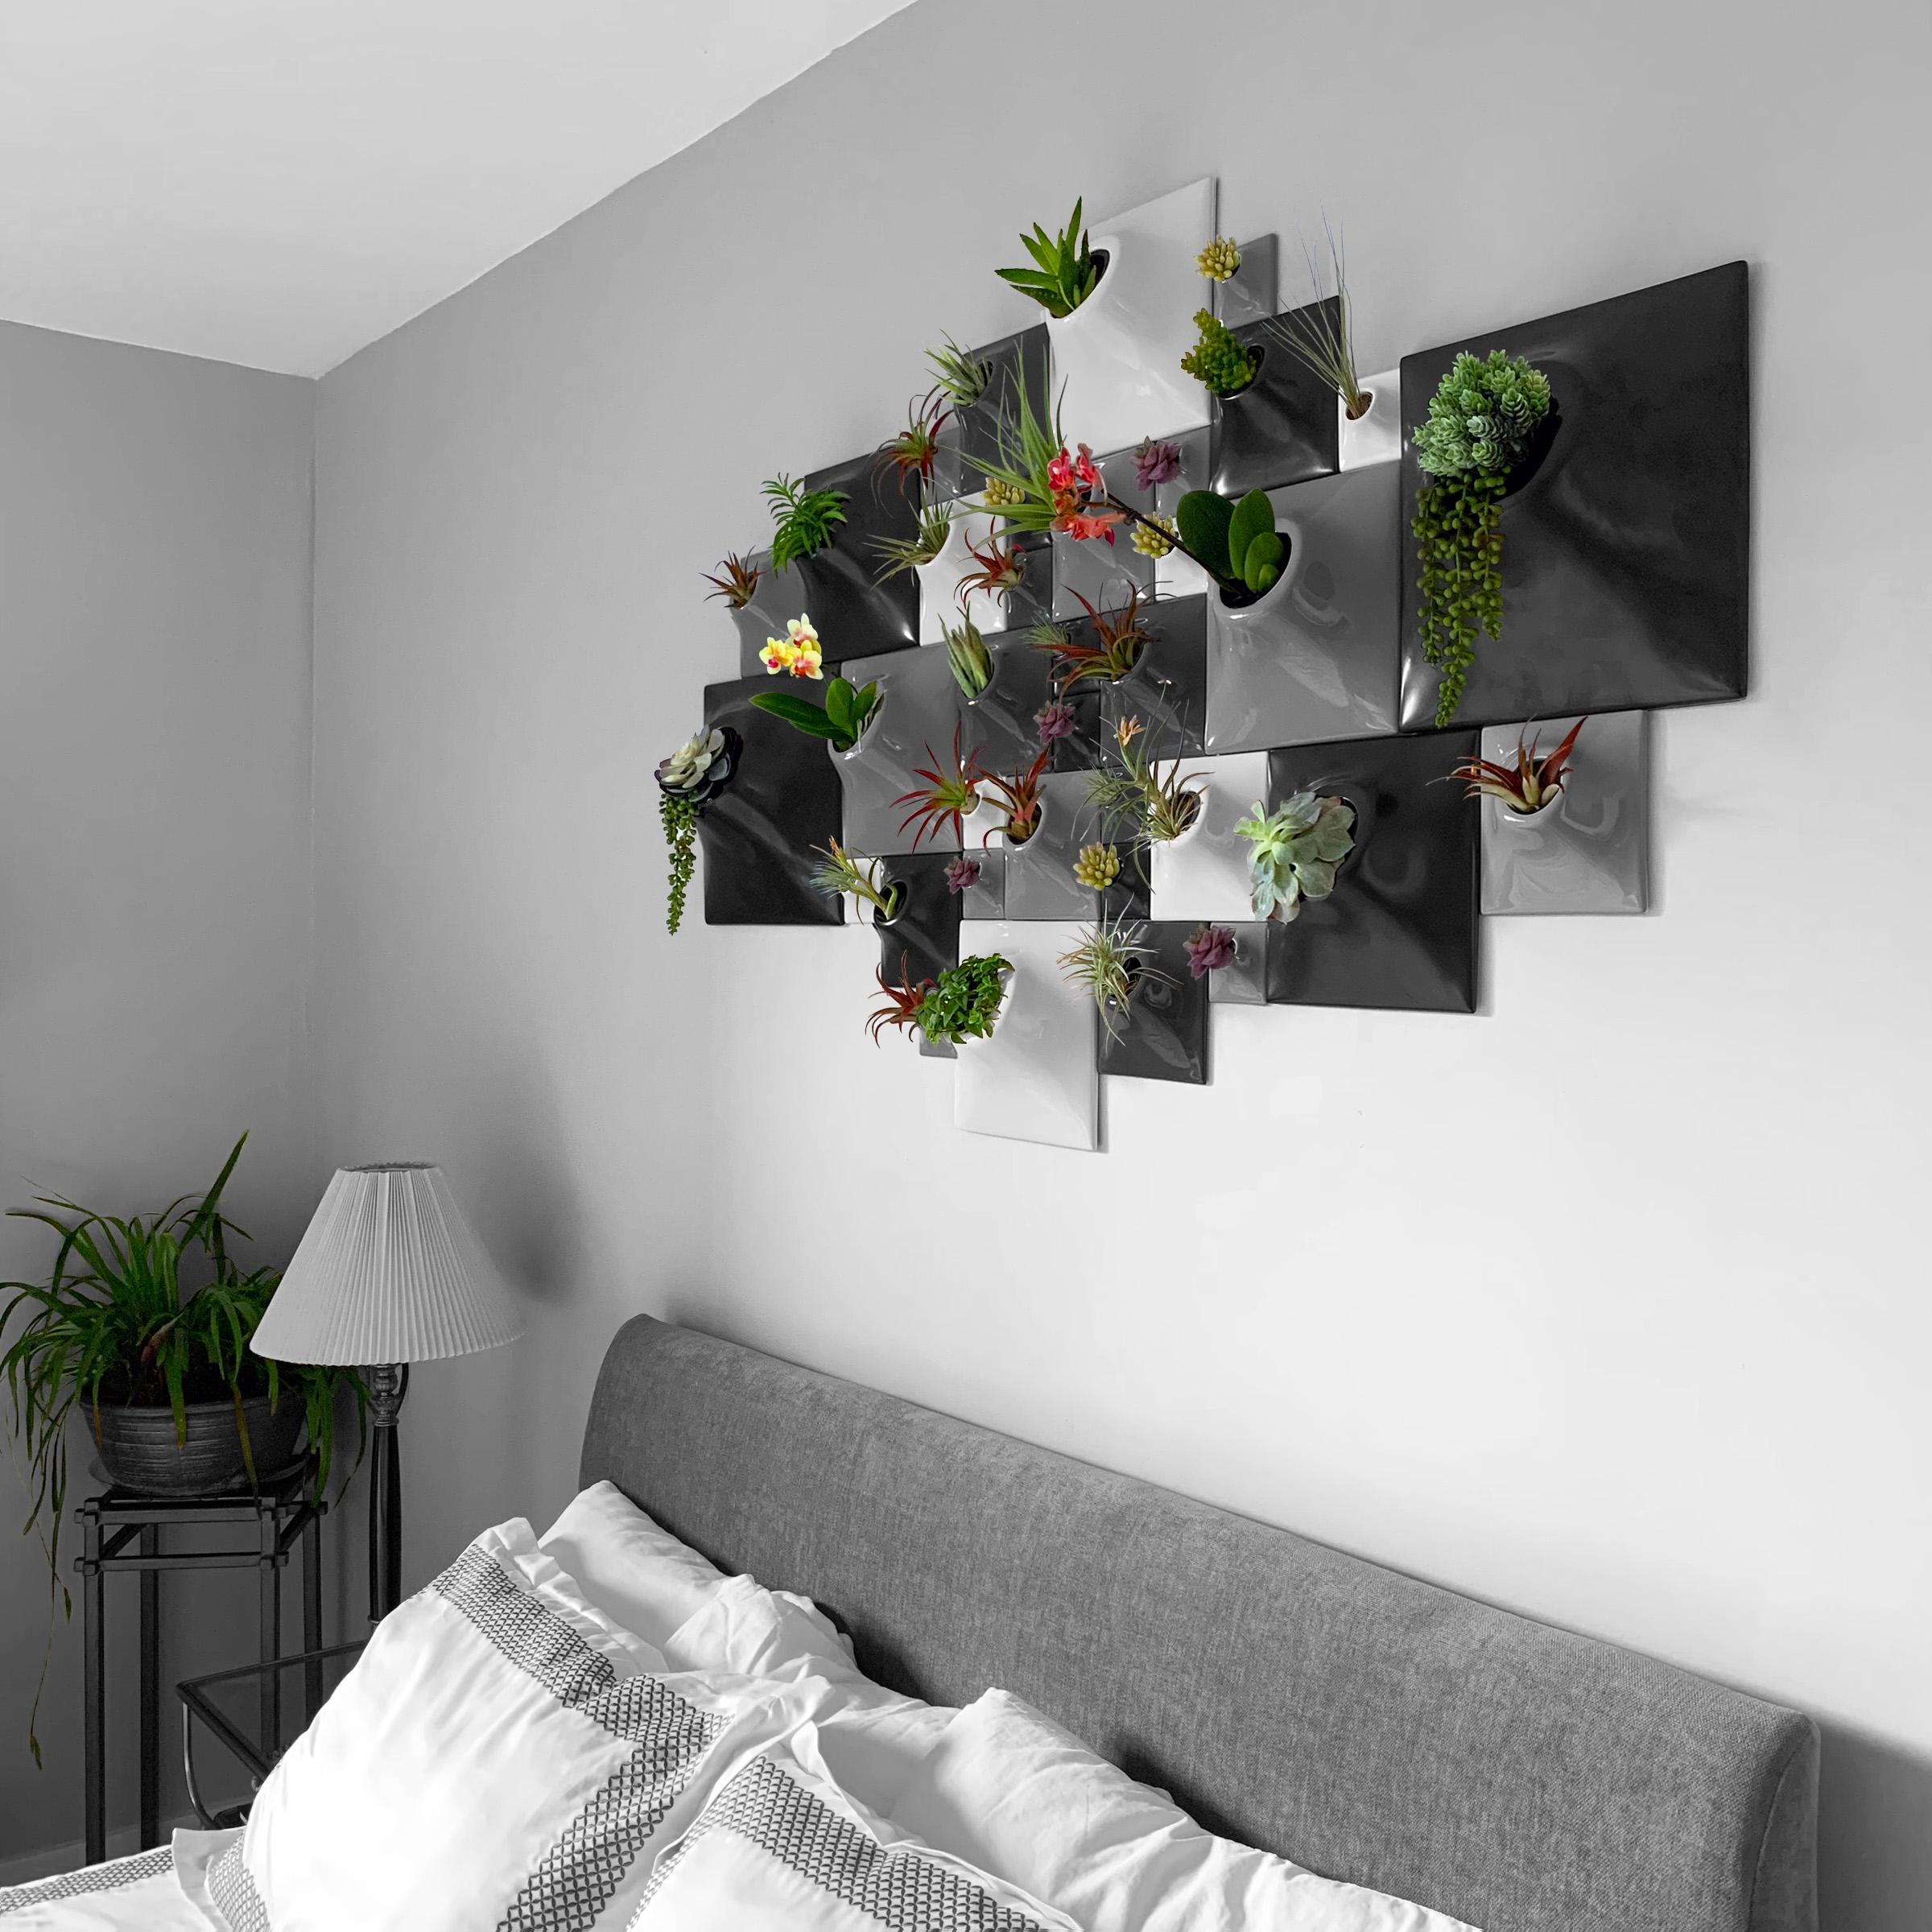 Cast Modern Ceramic Greenwall - Living Wall Decor - Plant Wall - Price per sq ft For Sale